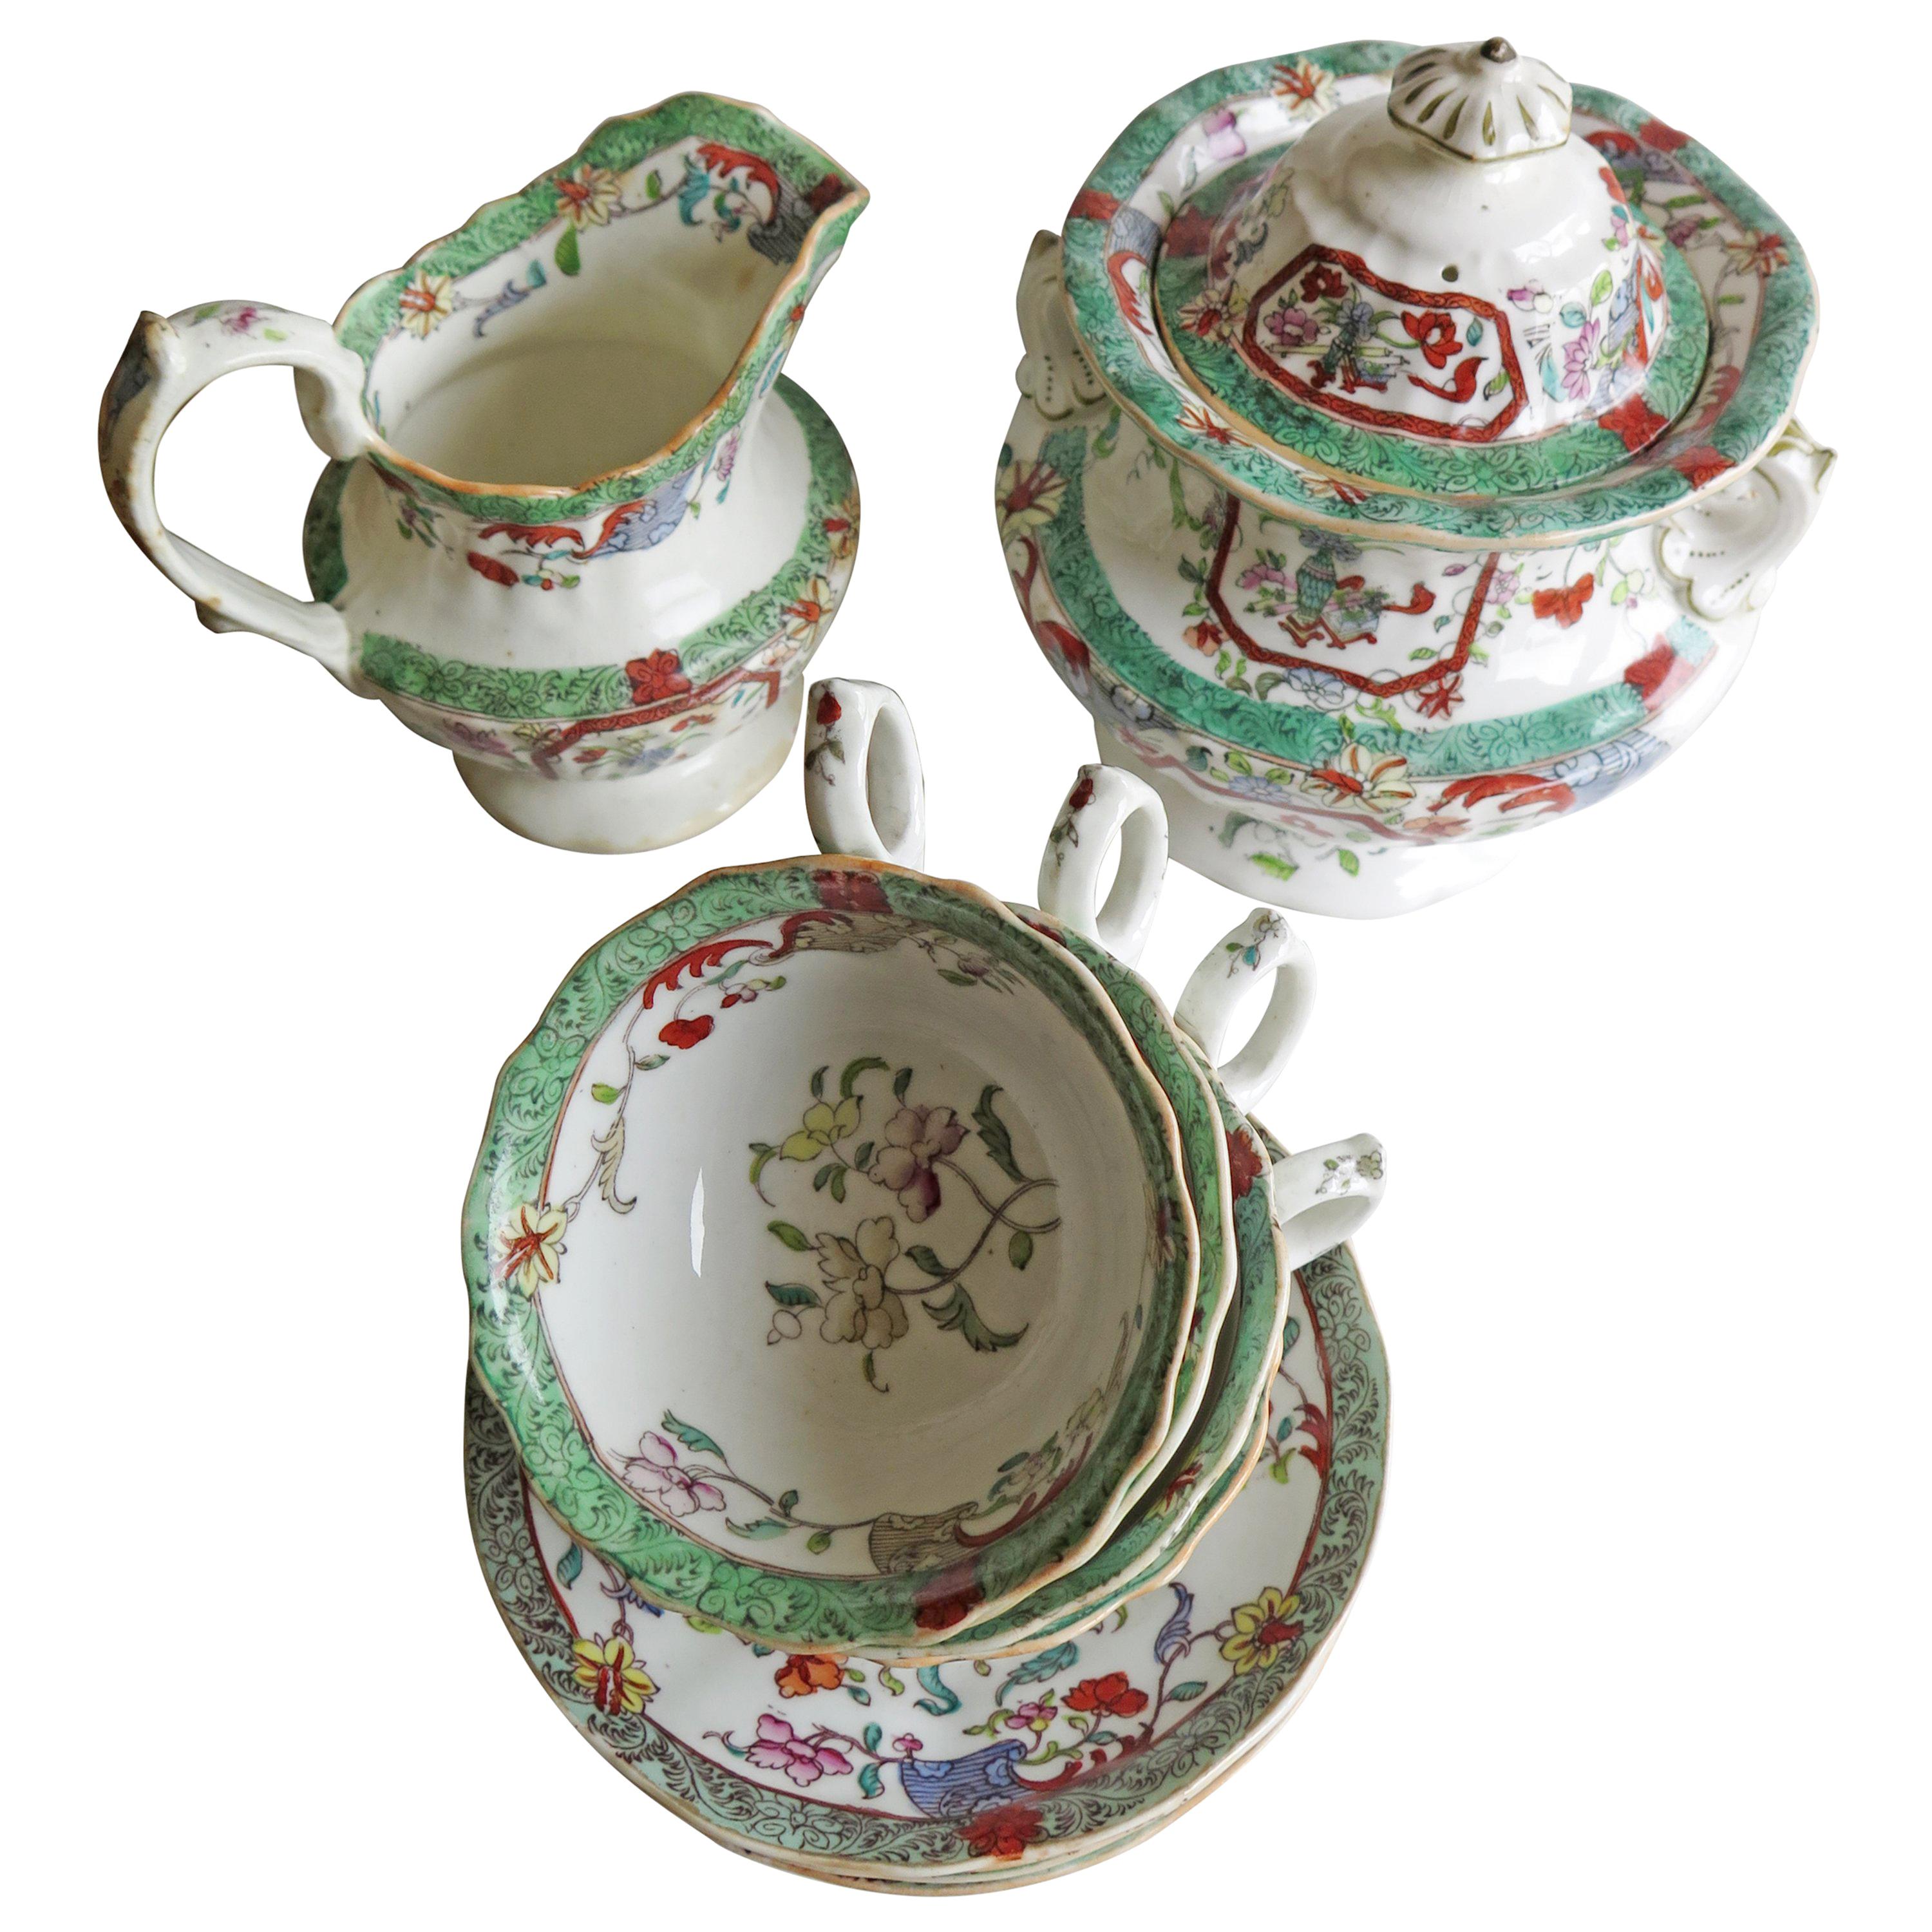 This is an early English porcelain part tea set, made by C. J. Mason (The same factory who produced Mason's Ironstone) during the period of William IVth, circa 1830-1835.

The tea set comprises ten pieces;
one x large lidded sucrier or sugar